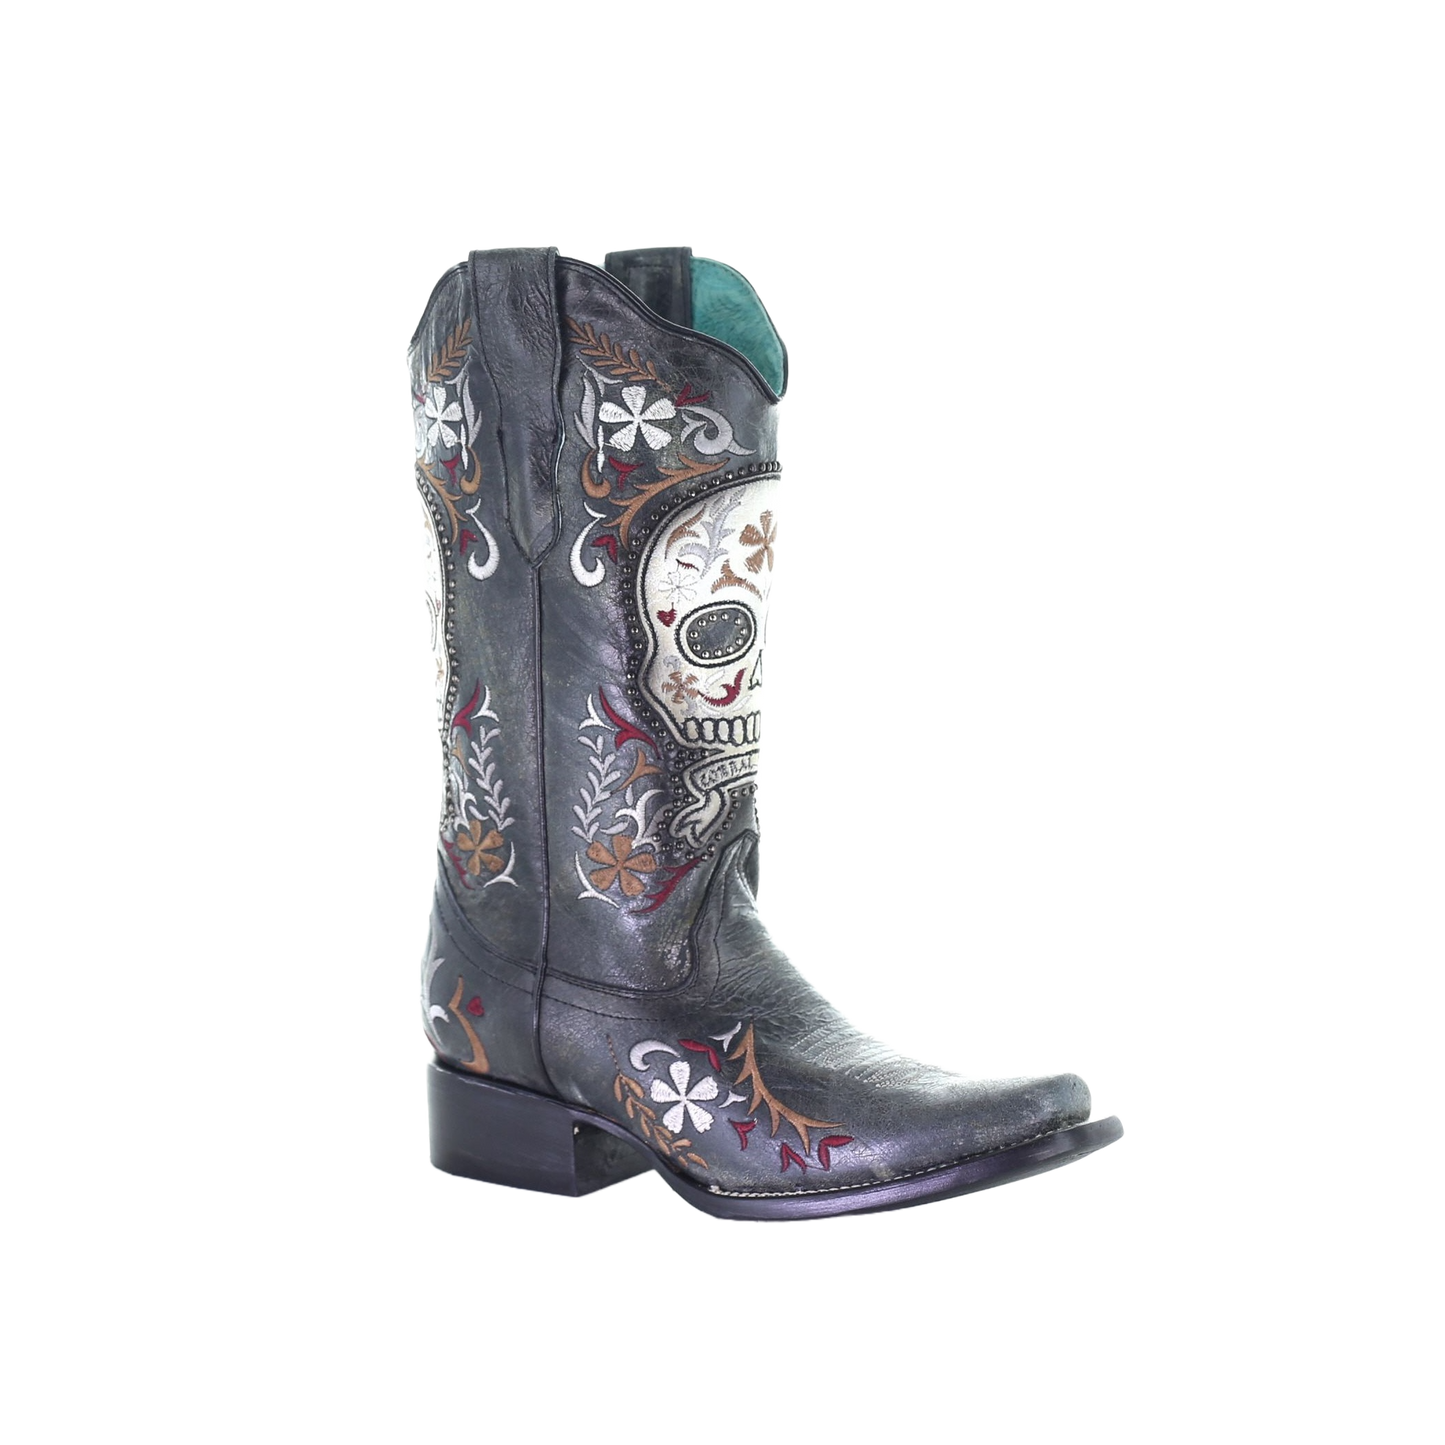 Corral Ladies Black Skull Overlay and Embroidery Square Toe Boots E1653